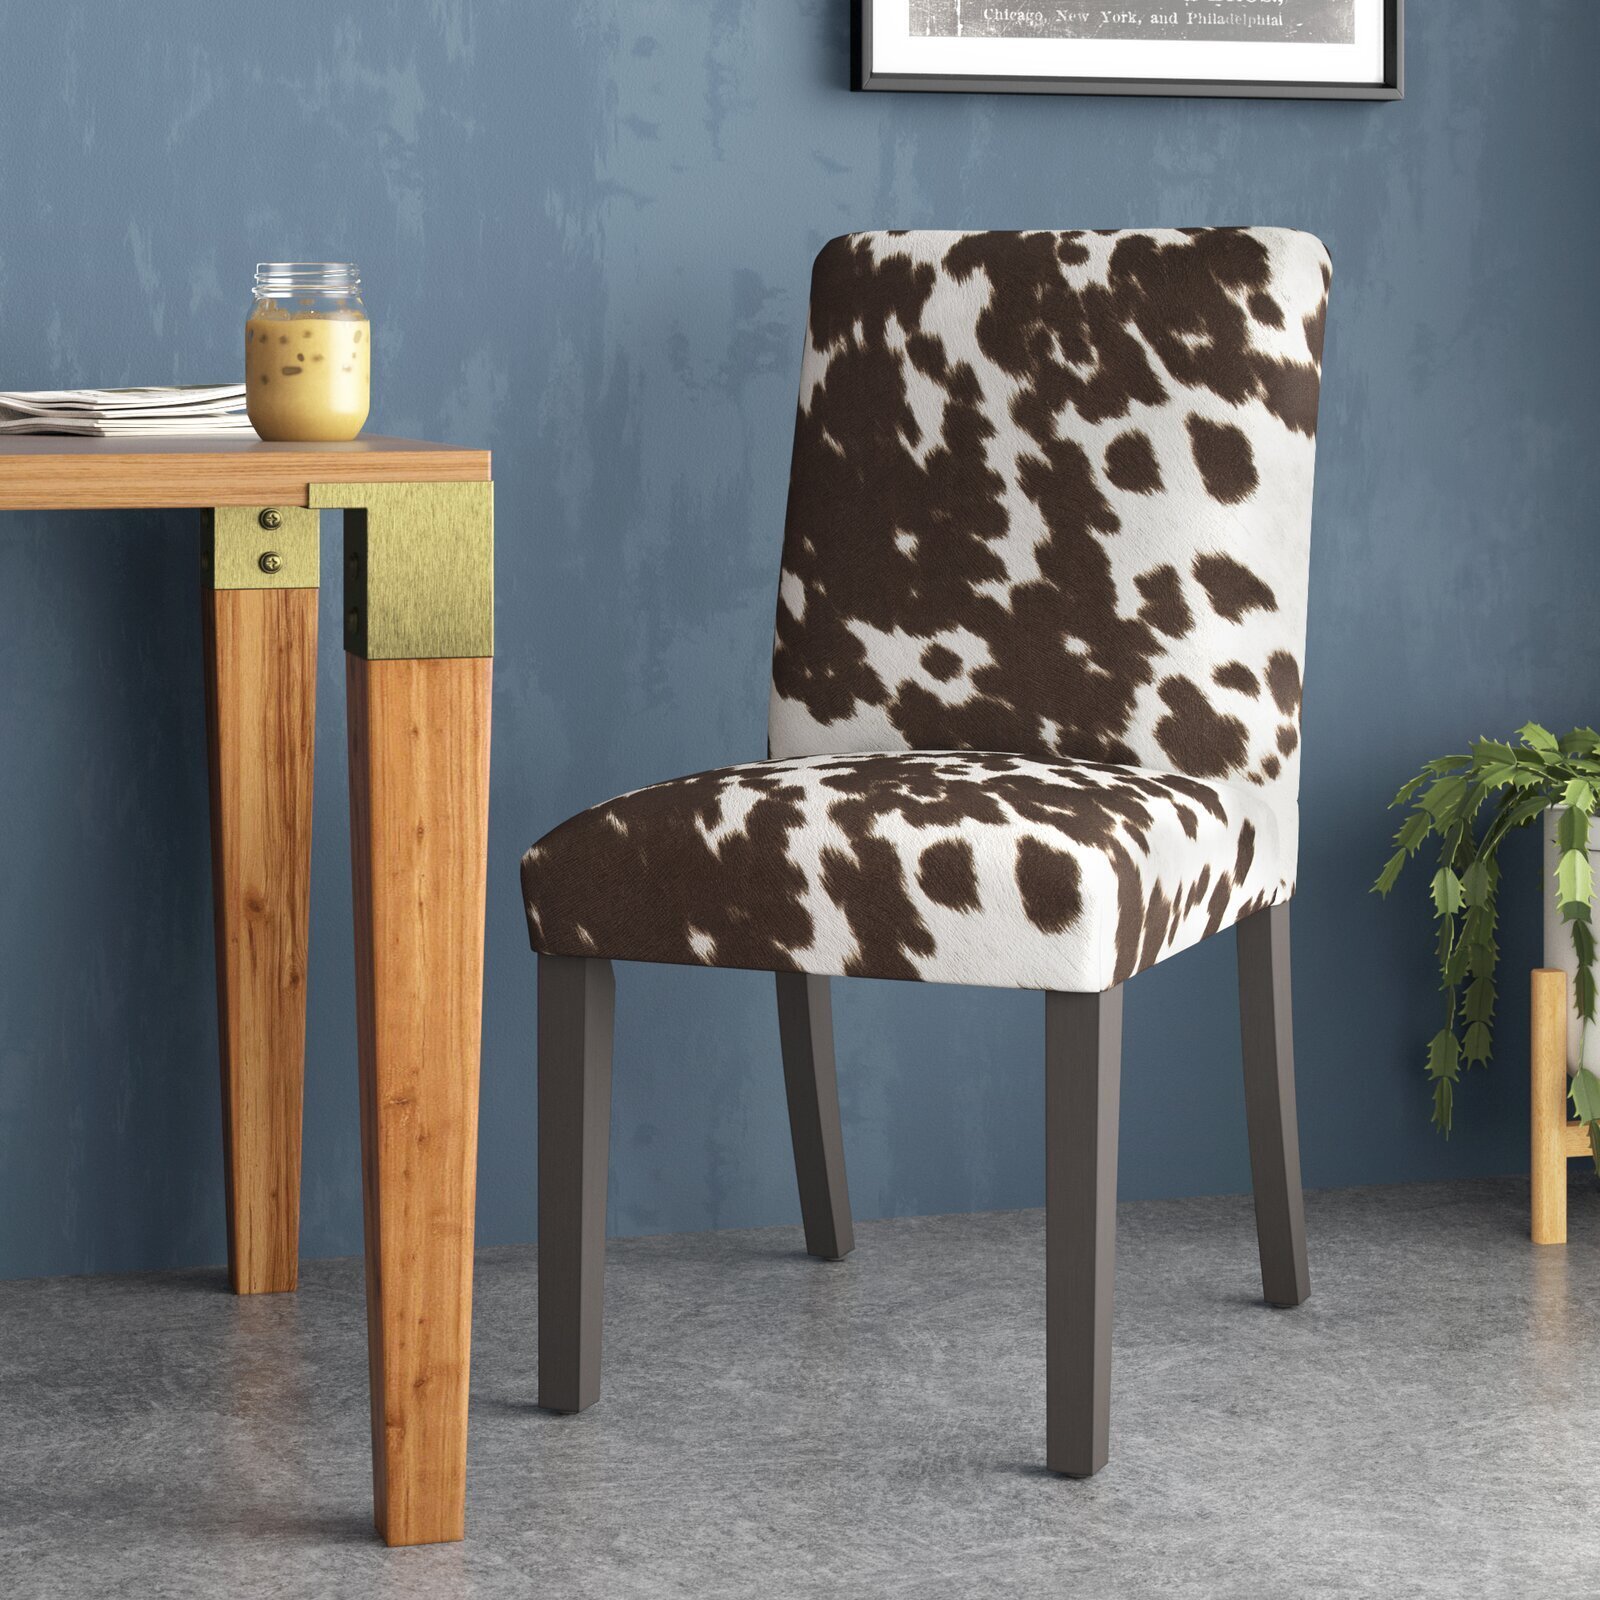 Cow hide animal print dining room chair